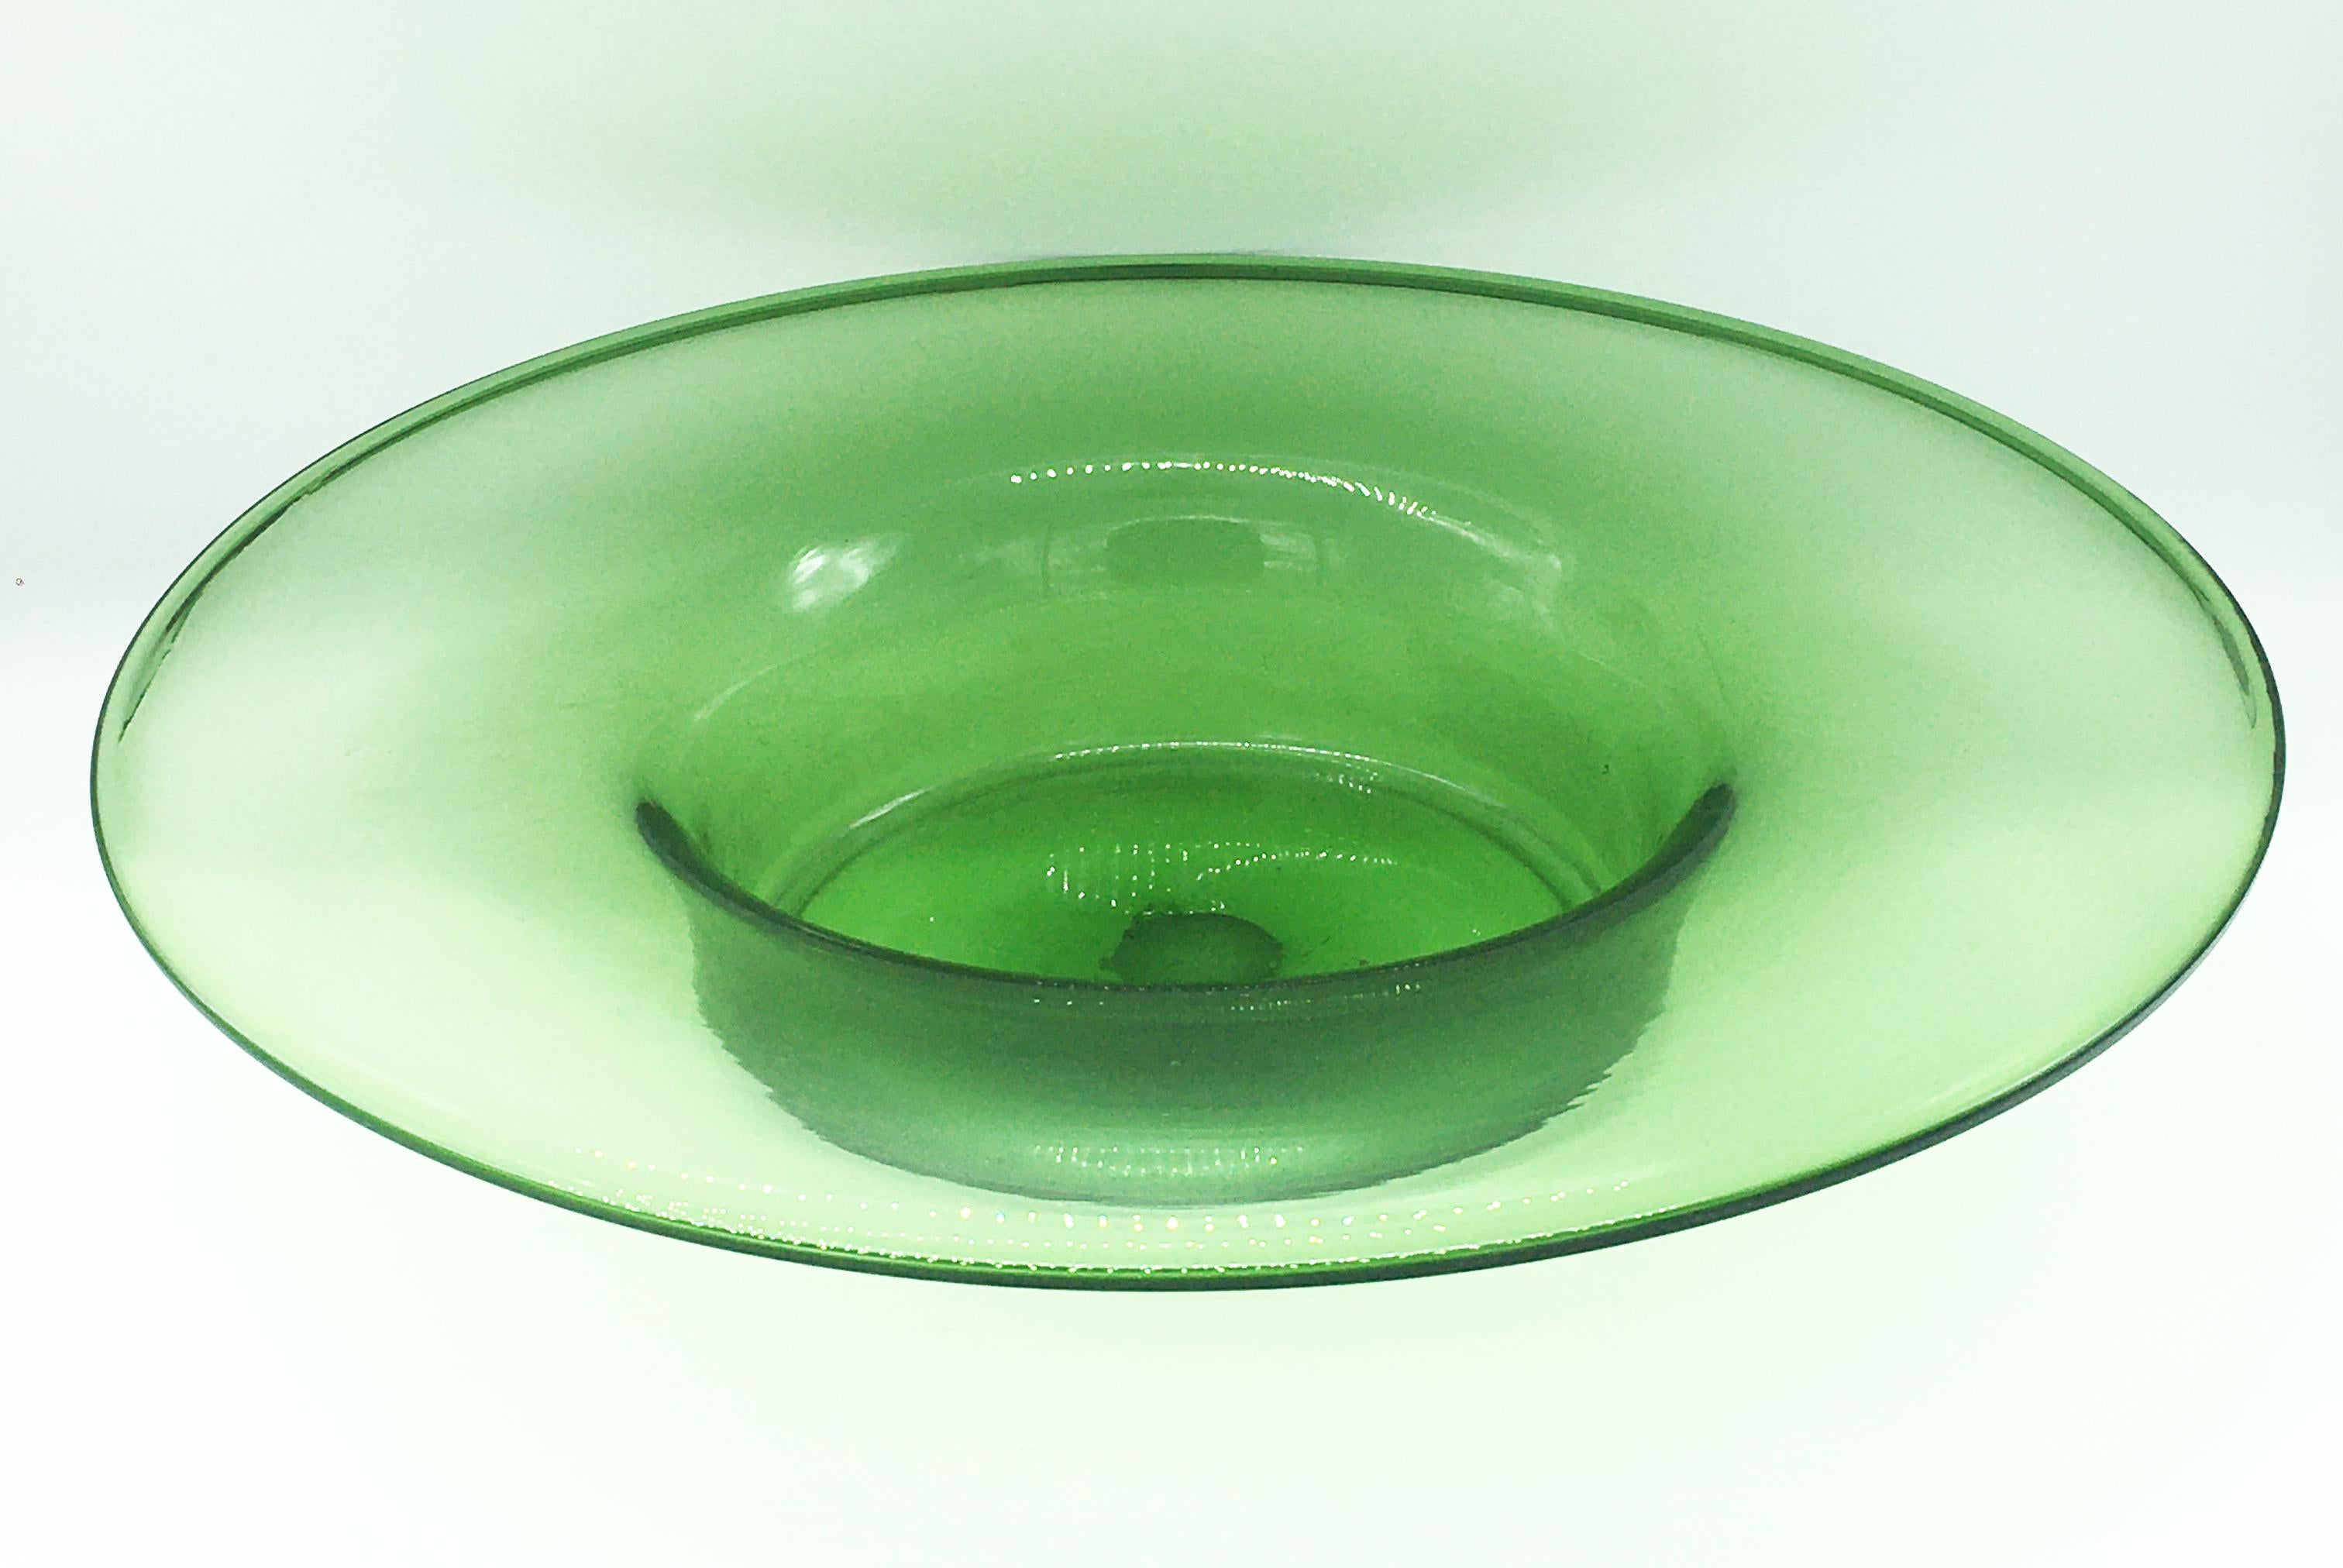 Very nice green hat-shaped Murano glass vessel.
It's in excellent condition, no chips.